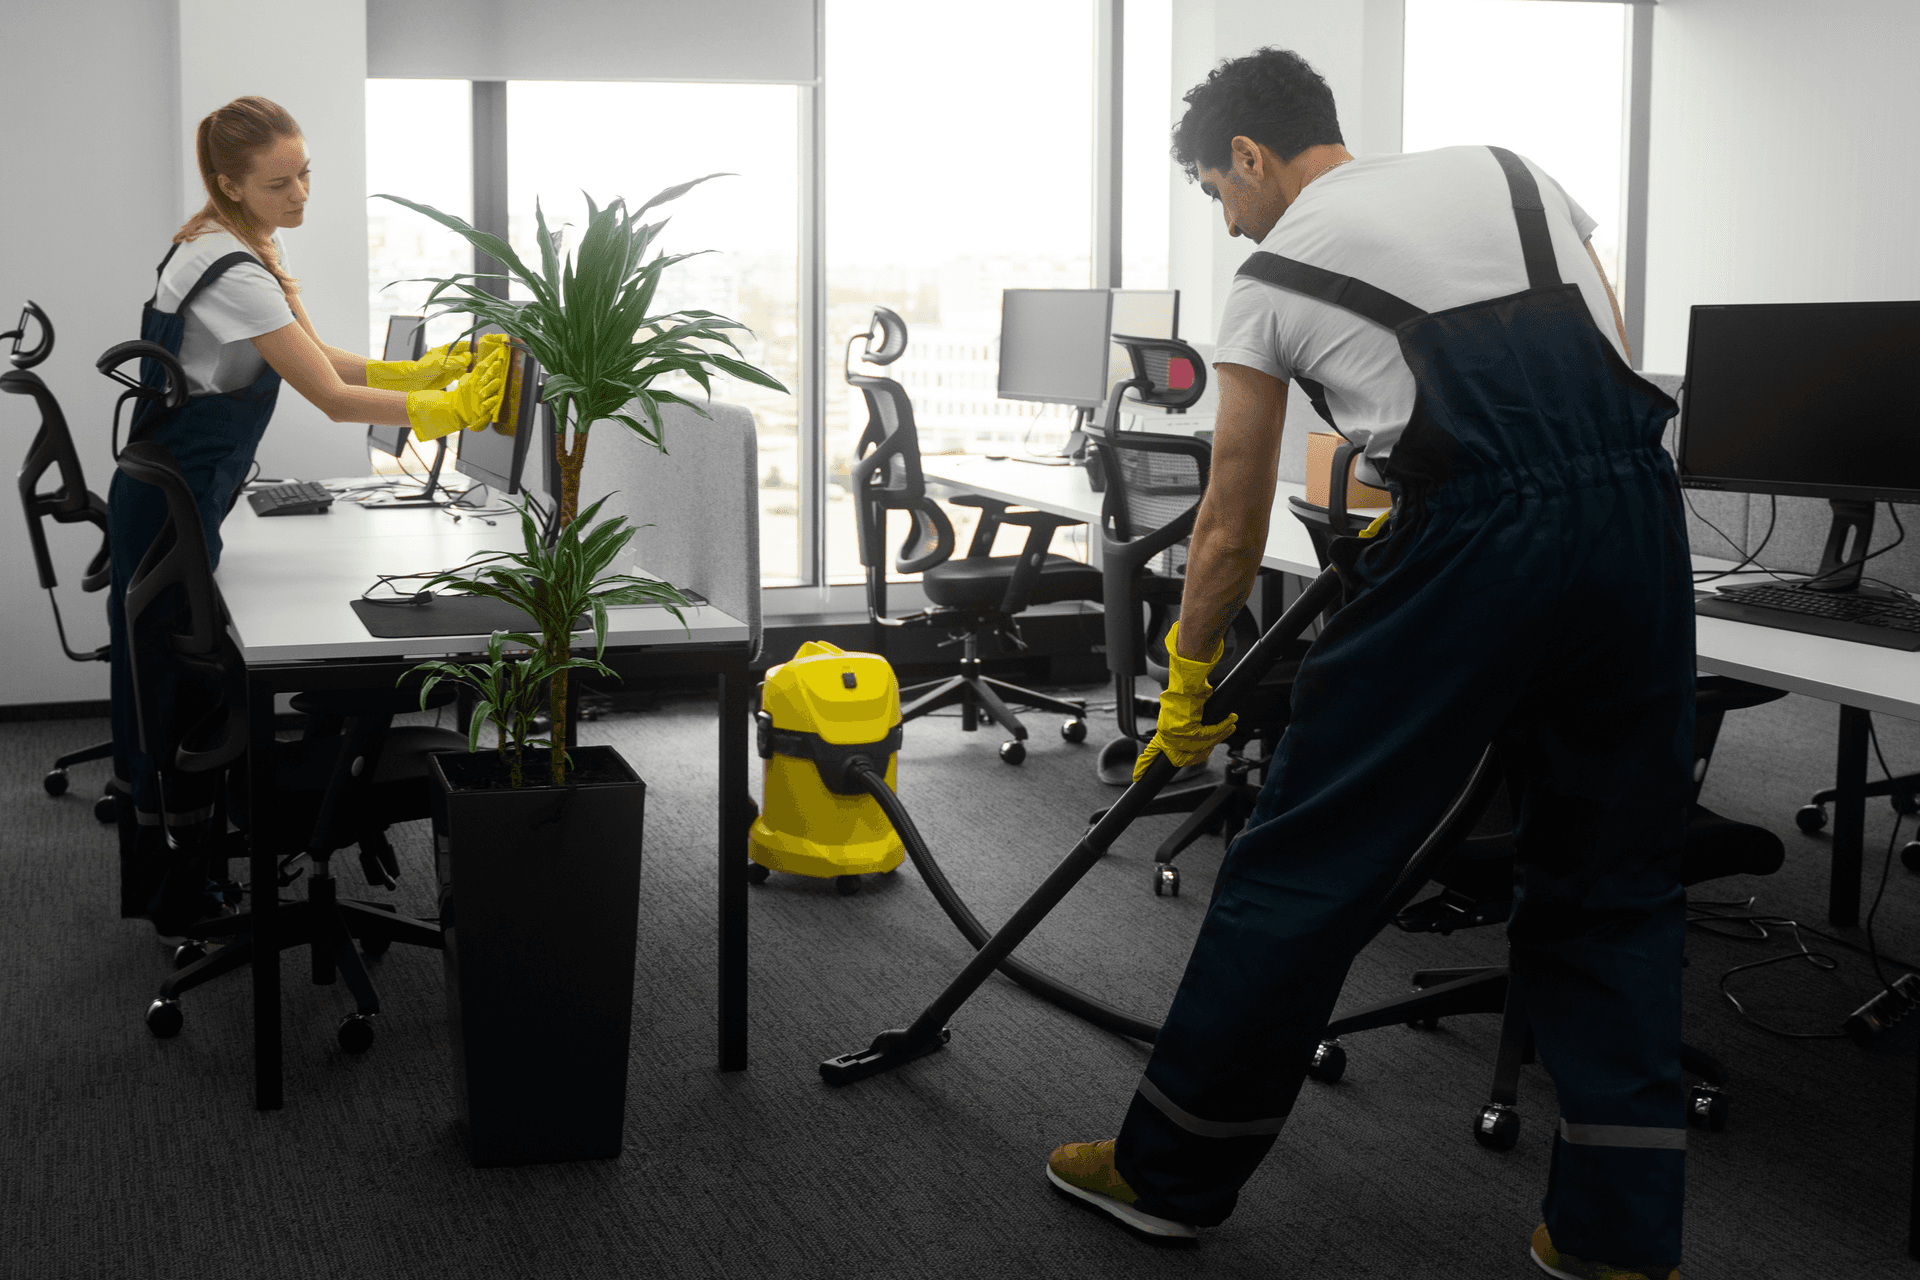 A janitorial service team providing quality cleaning services for businesses.